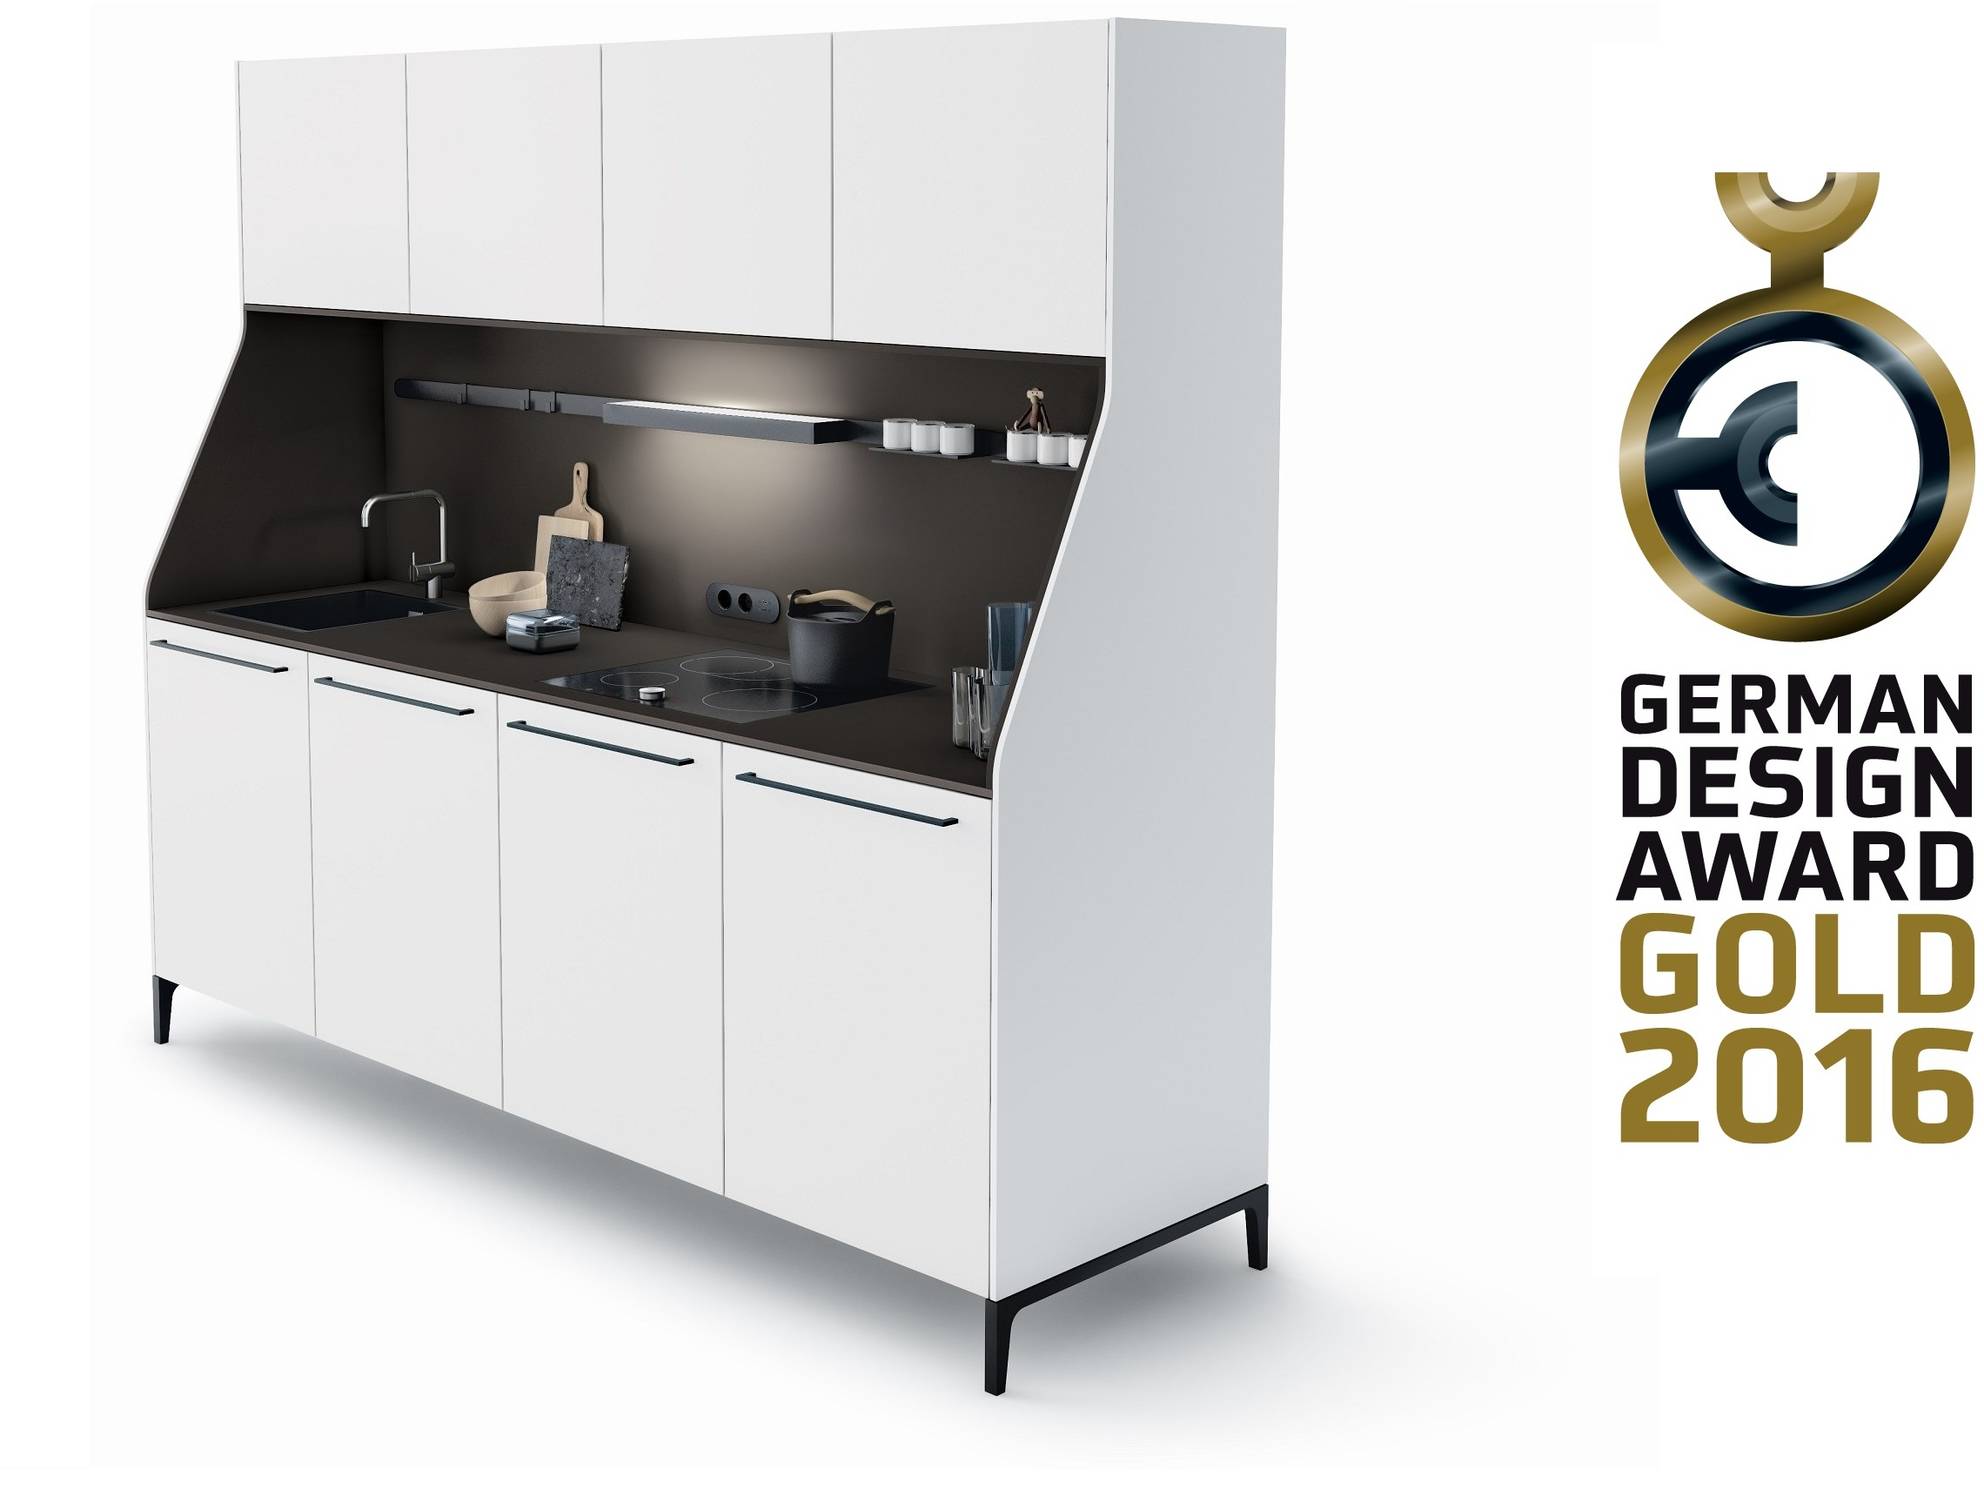 The SieMatic 29 won the German Design Award in GOLD from the German Design Council in 2016.